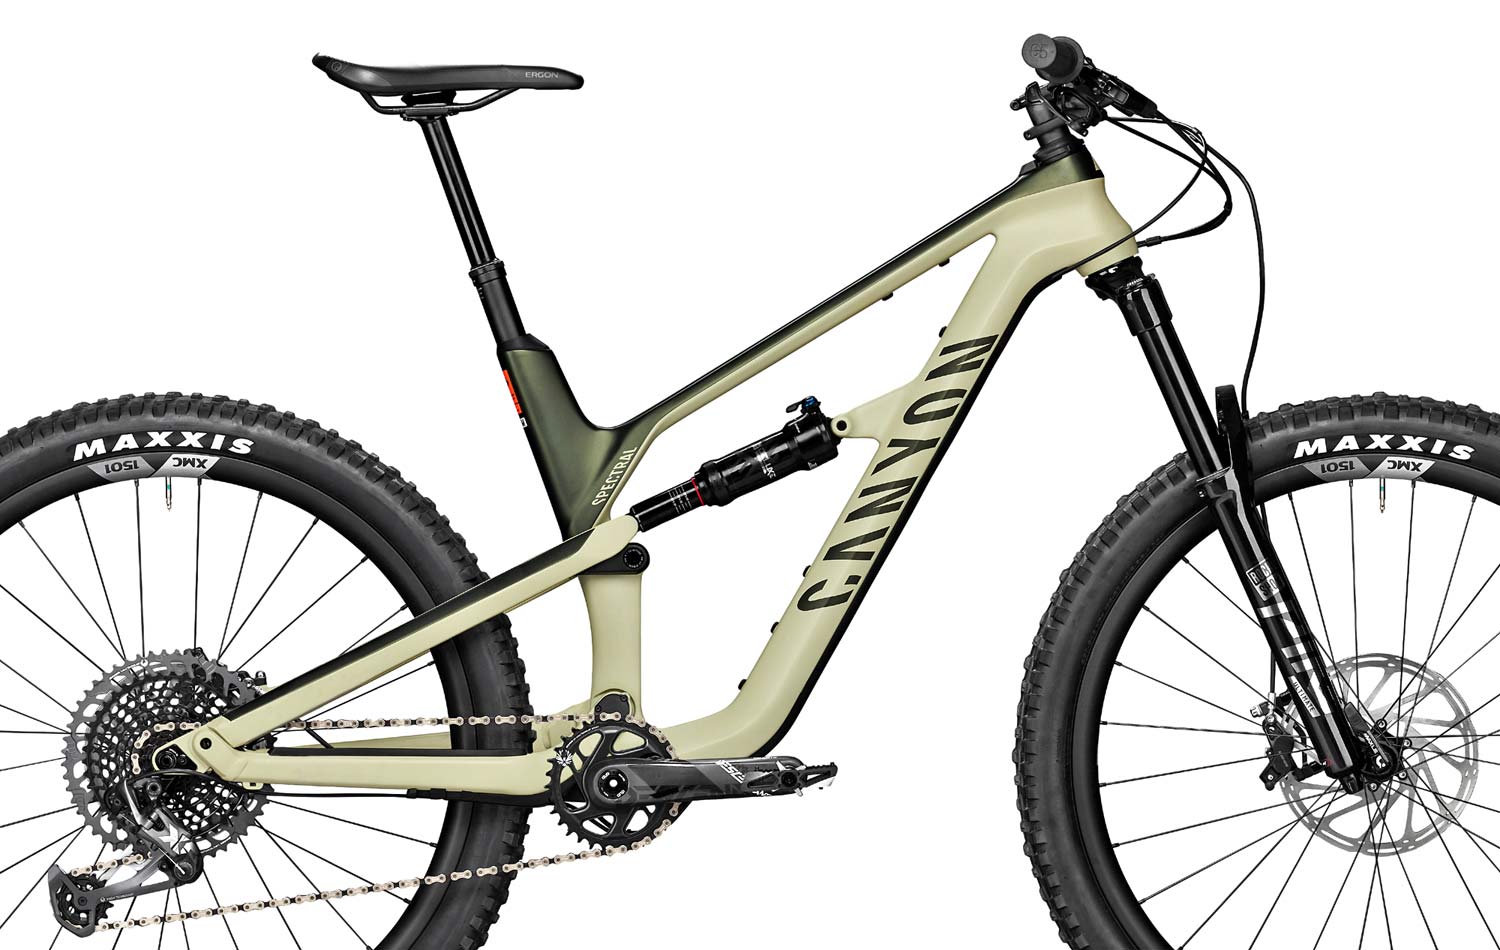 2021 Canyon Spectral trail bike, 27.5" 150mm all-mountain bike in carbon or alloy Non Forest